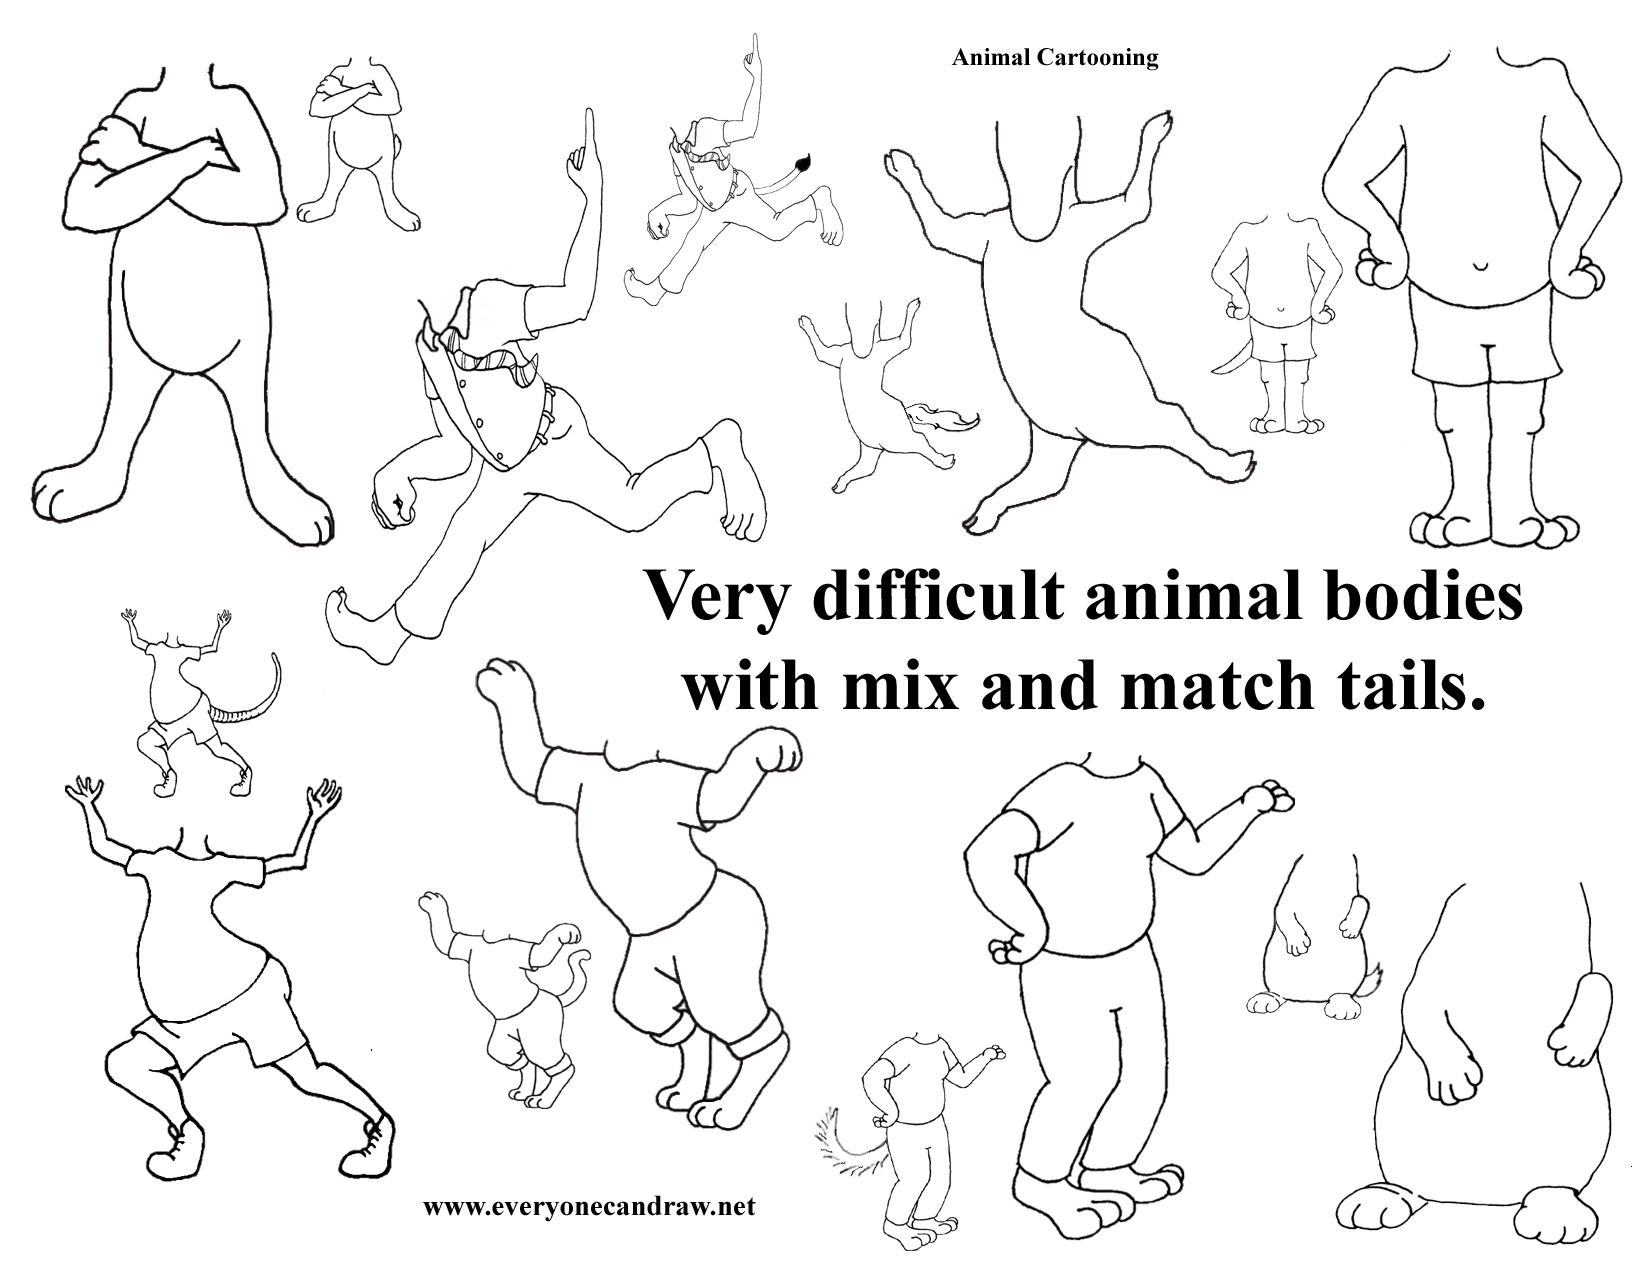 Animal bodies - very difficult with tails